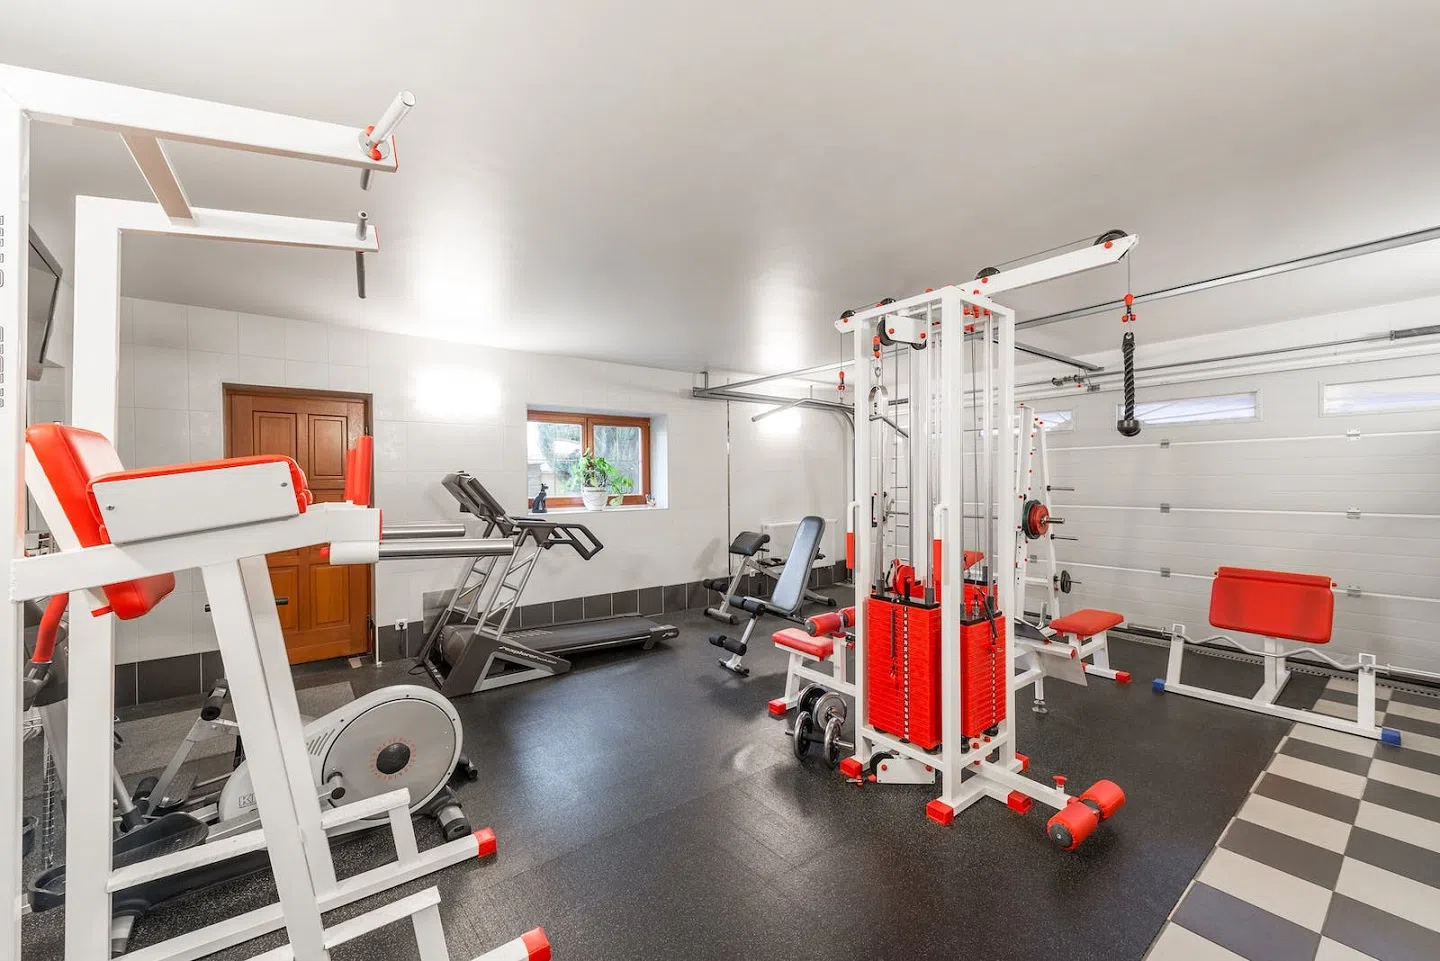 Gym and Home Gym Flooring Common Design Tips